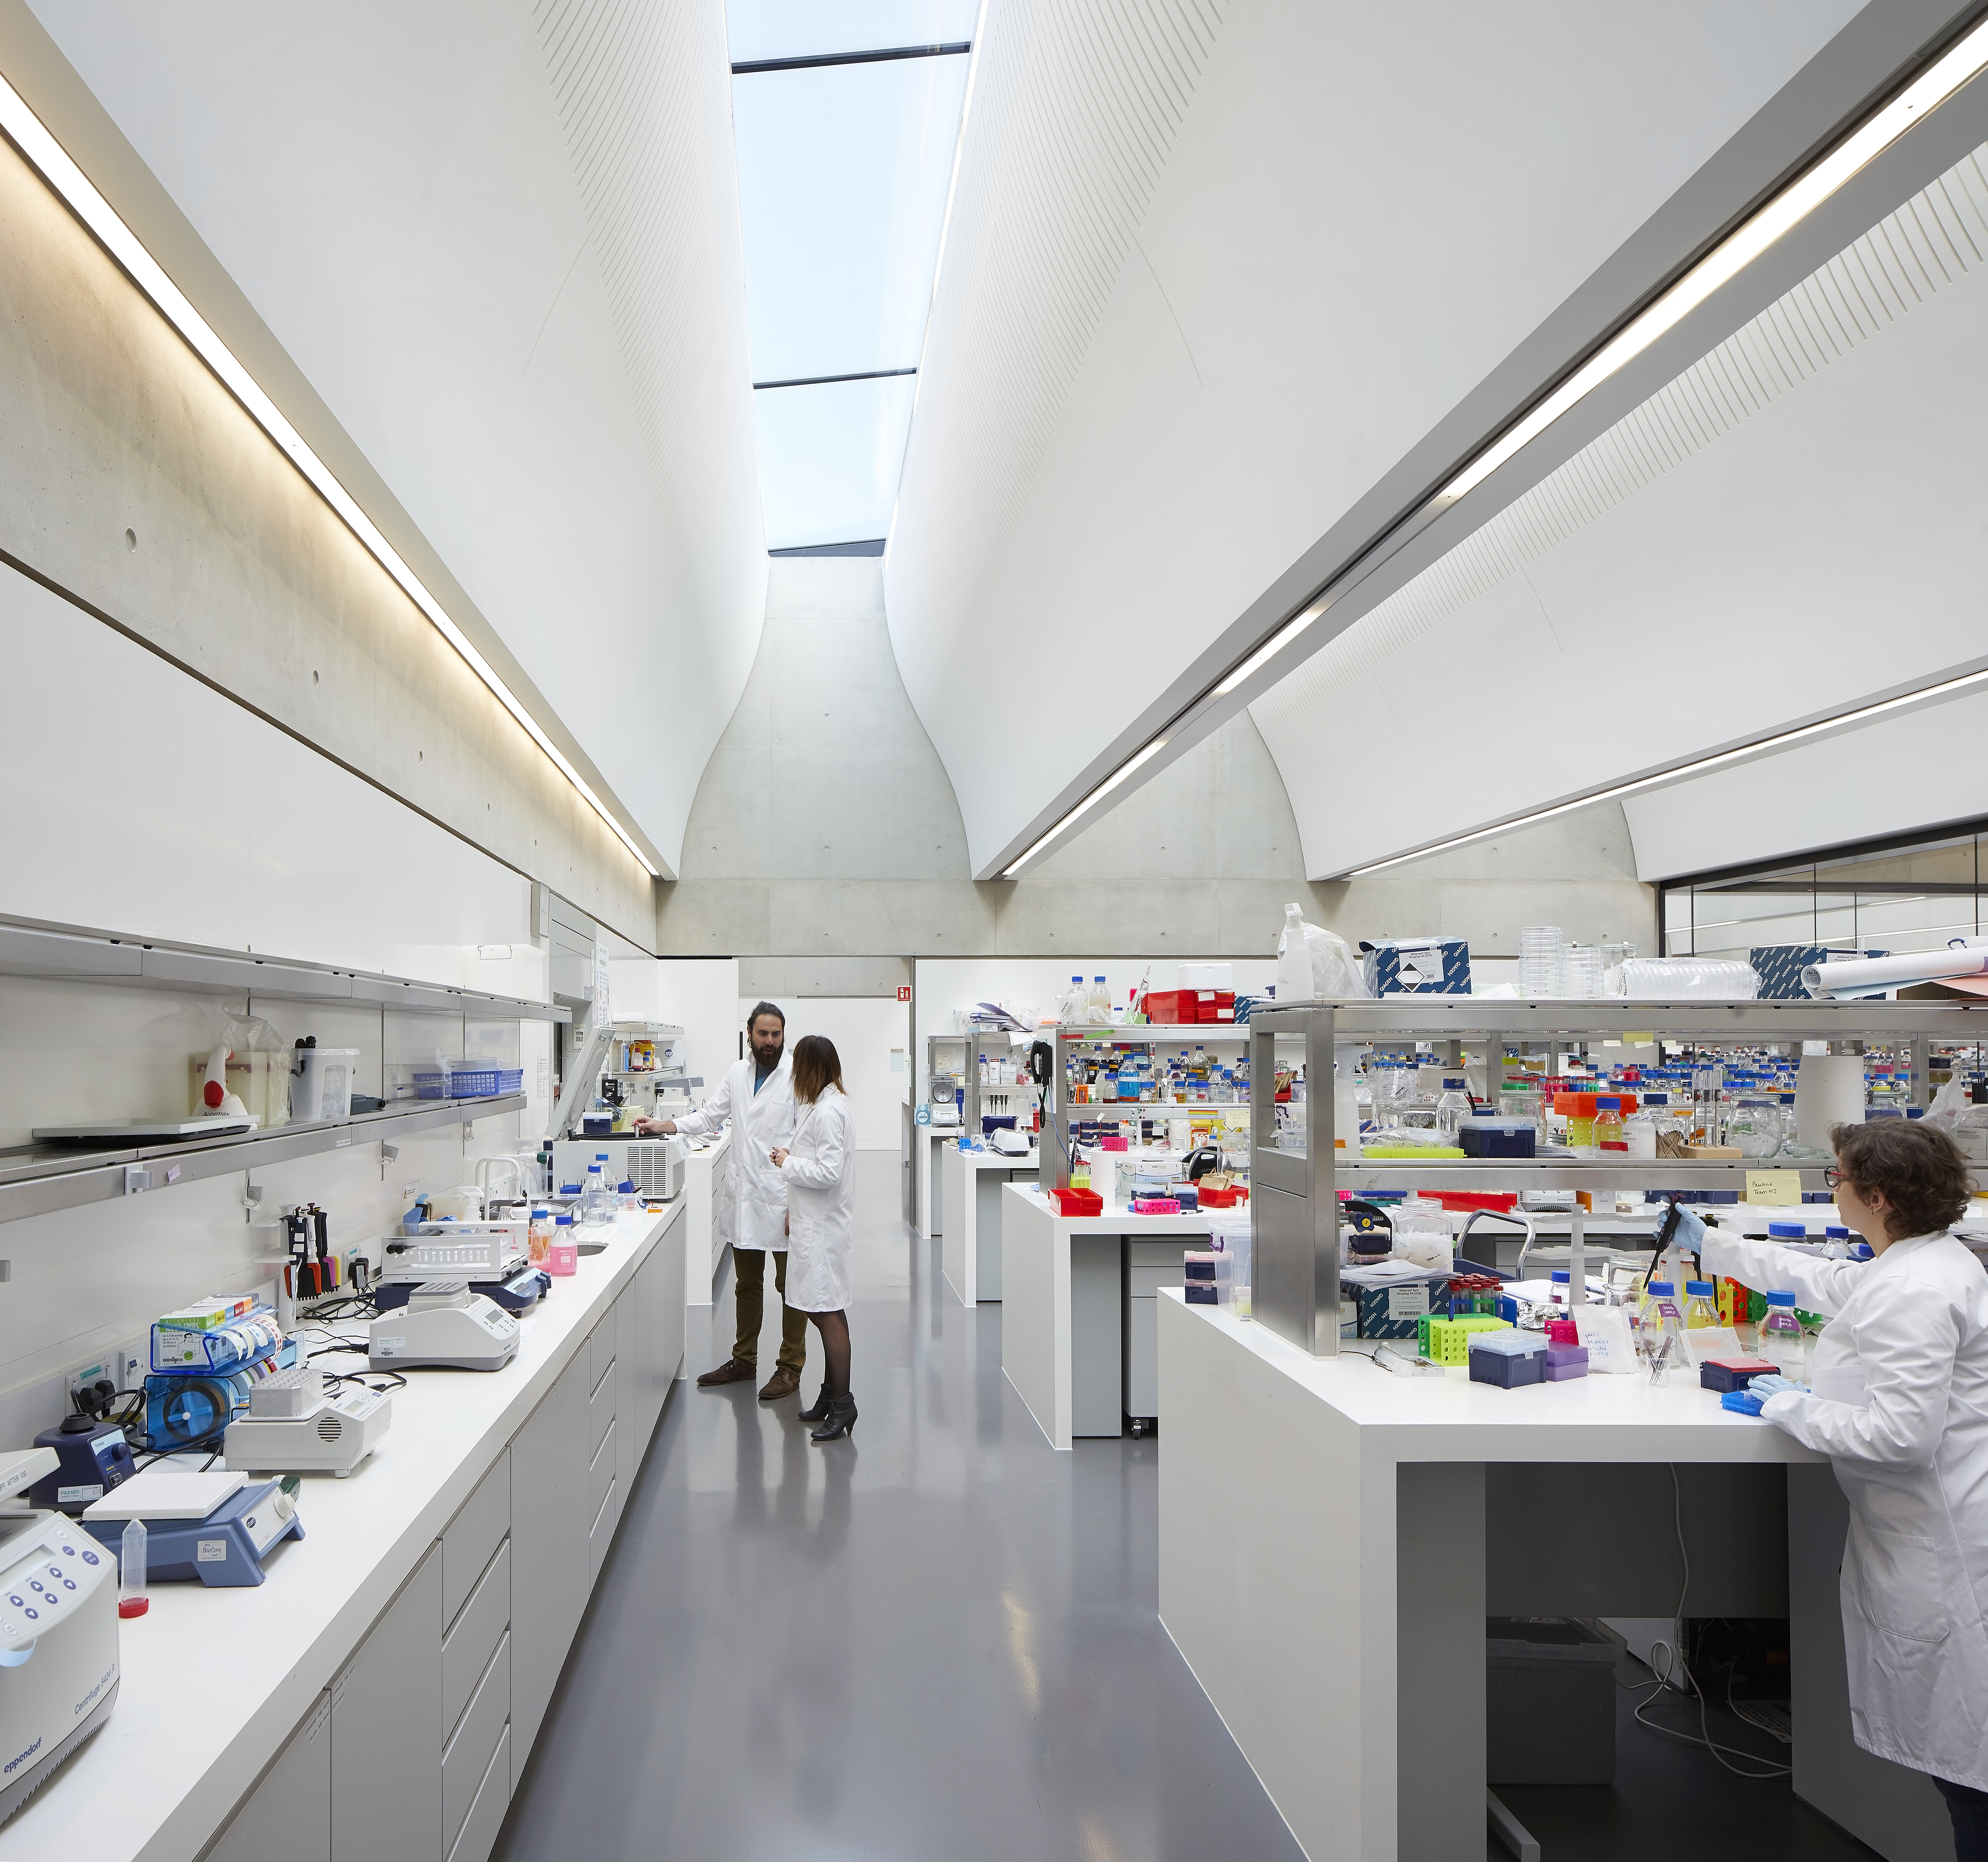 The wet lab areas within the Sainsbury Laboratory are flooded in natural light thanks to glass ceilings